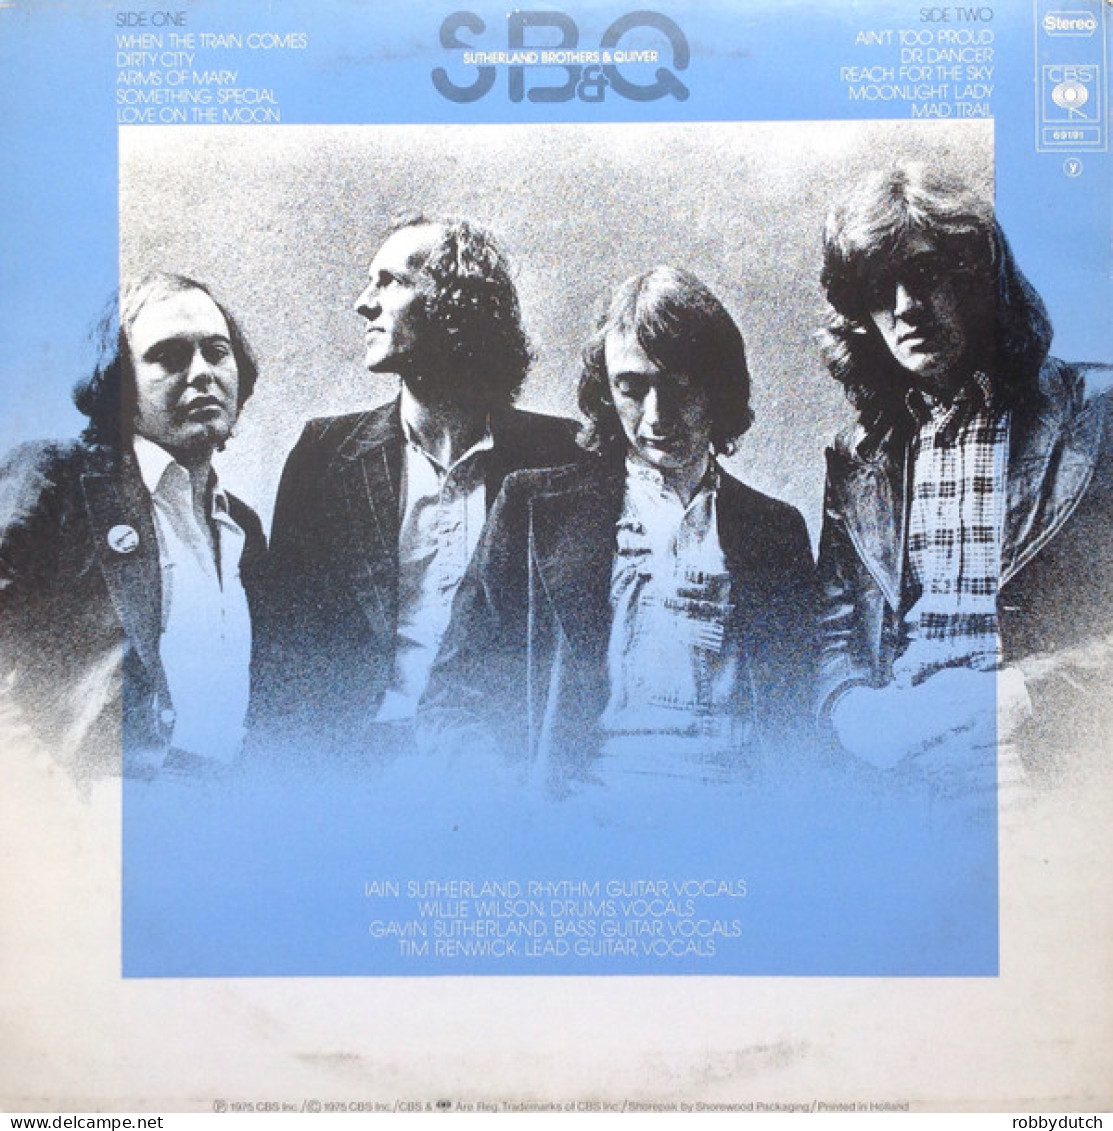 * LP *  SUTHERLAND BROTHERS & QUIVER - REACH FOR THE SKY (Europe 1975 EX-) - Country En Folk